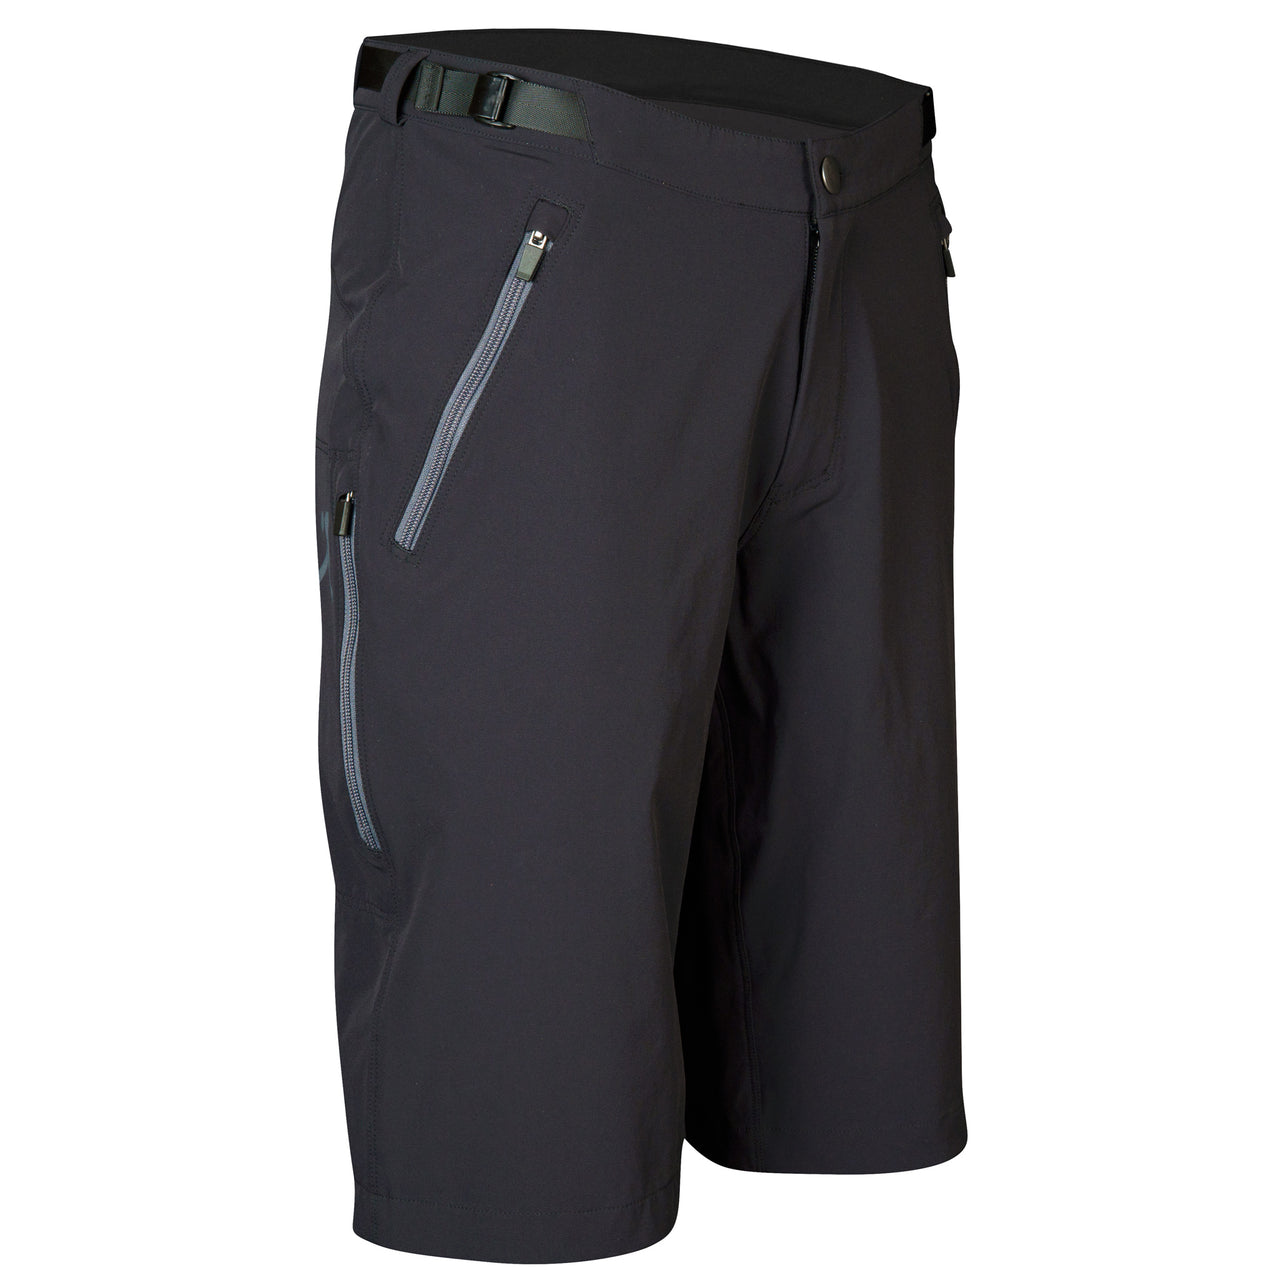 Enduro MTB pants and shorts in Athletic Fit and Regular Fit